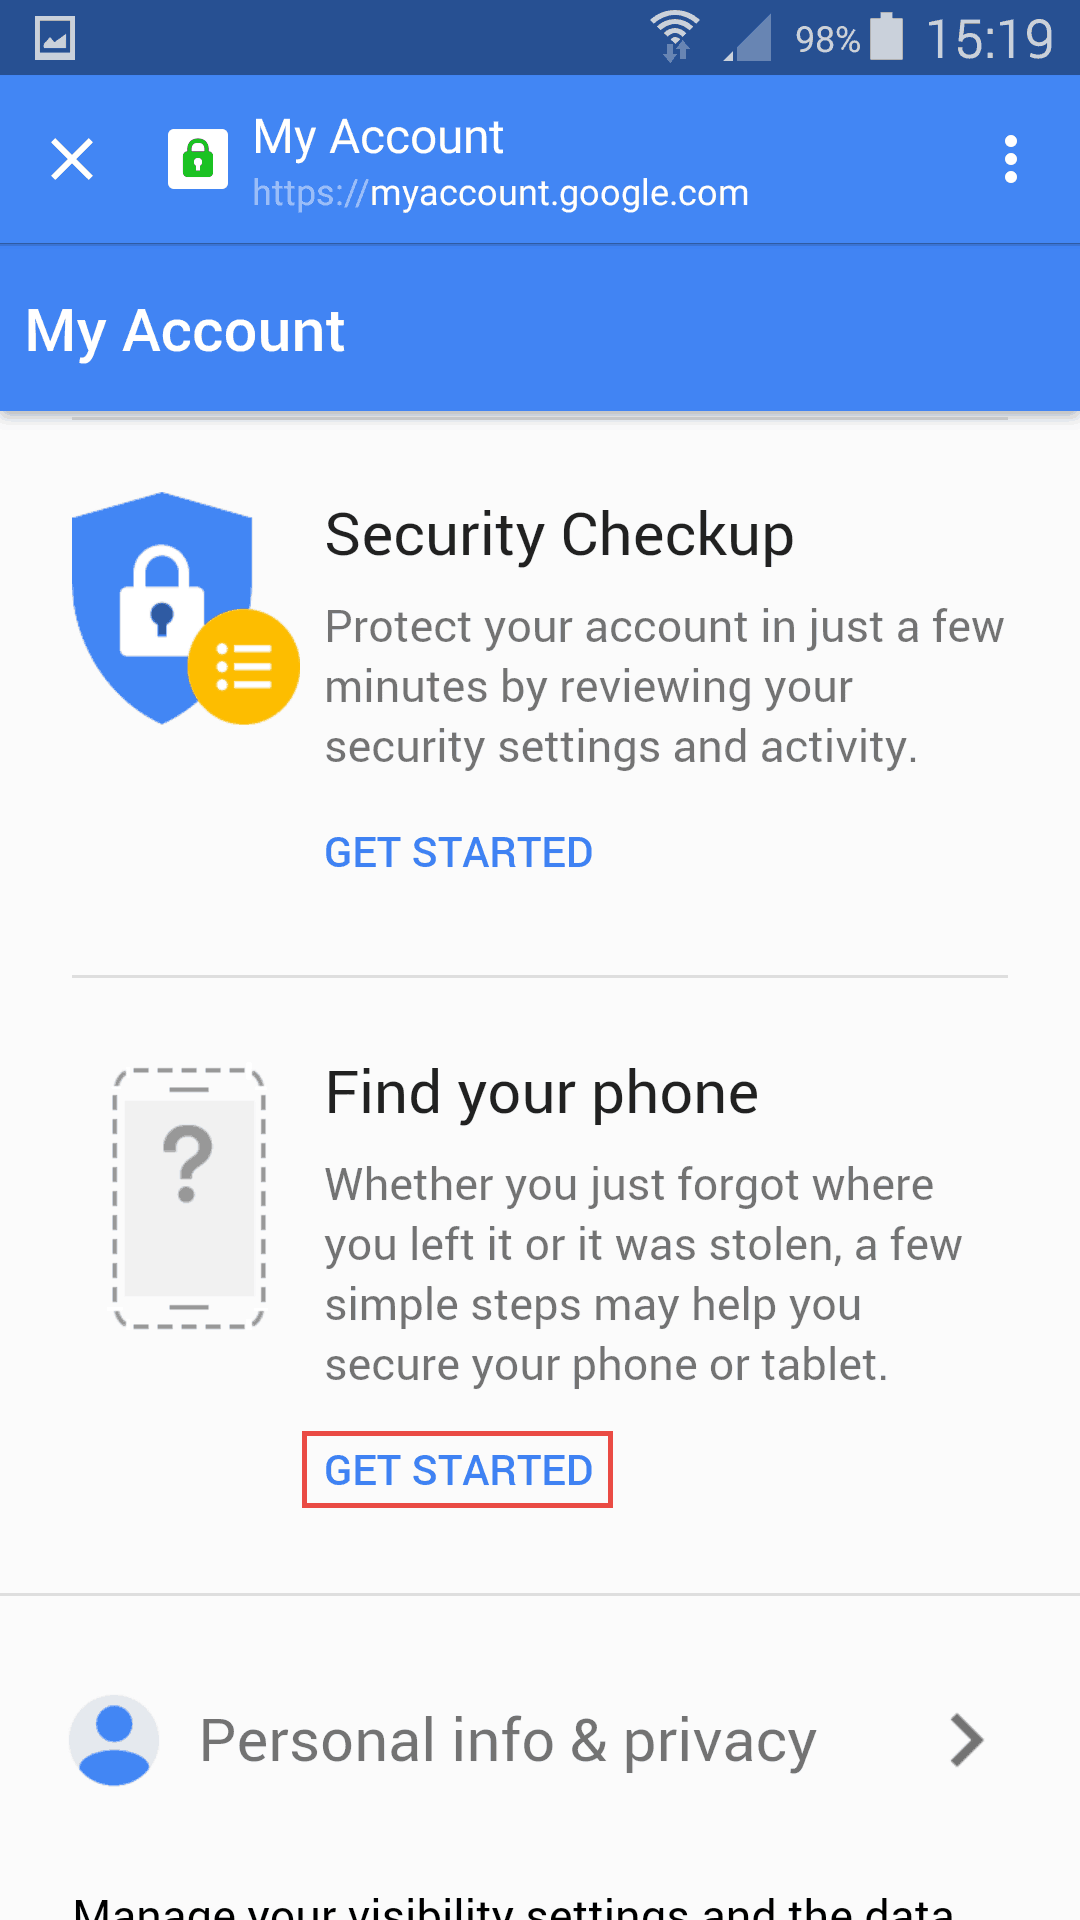 [Guide] Find your lost Android or iOS phone with Google My Account service